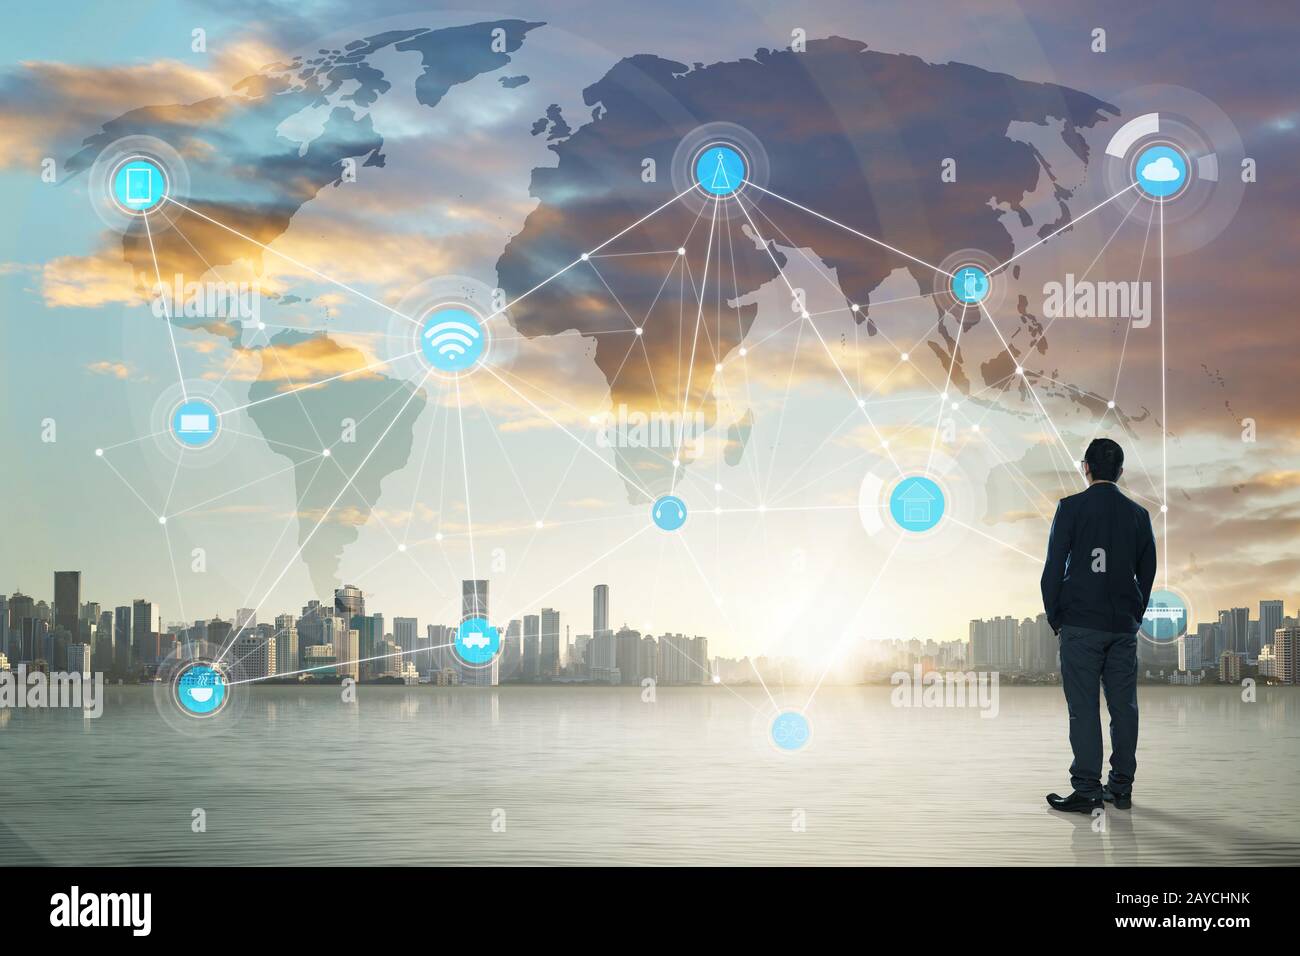 International business concept with businessman on city skyline background with network on map and sunlight Stock Photo